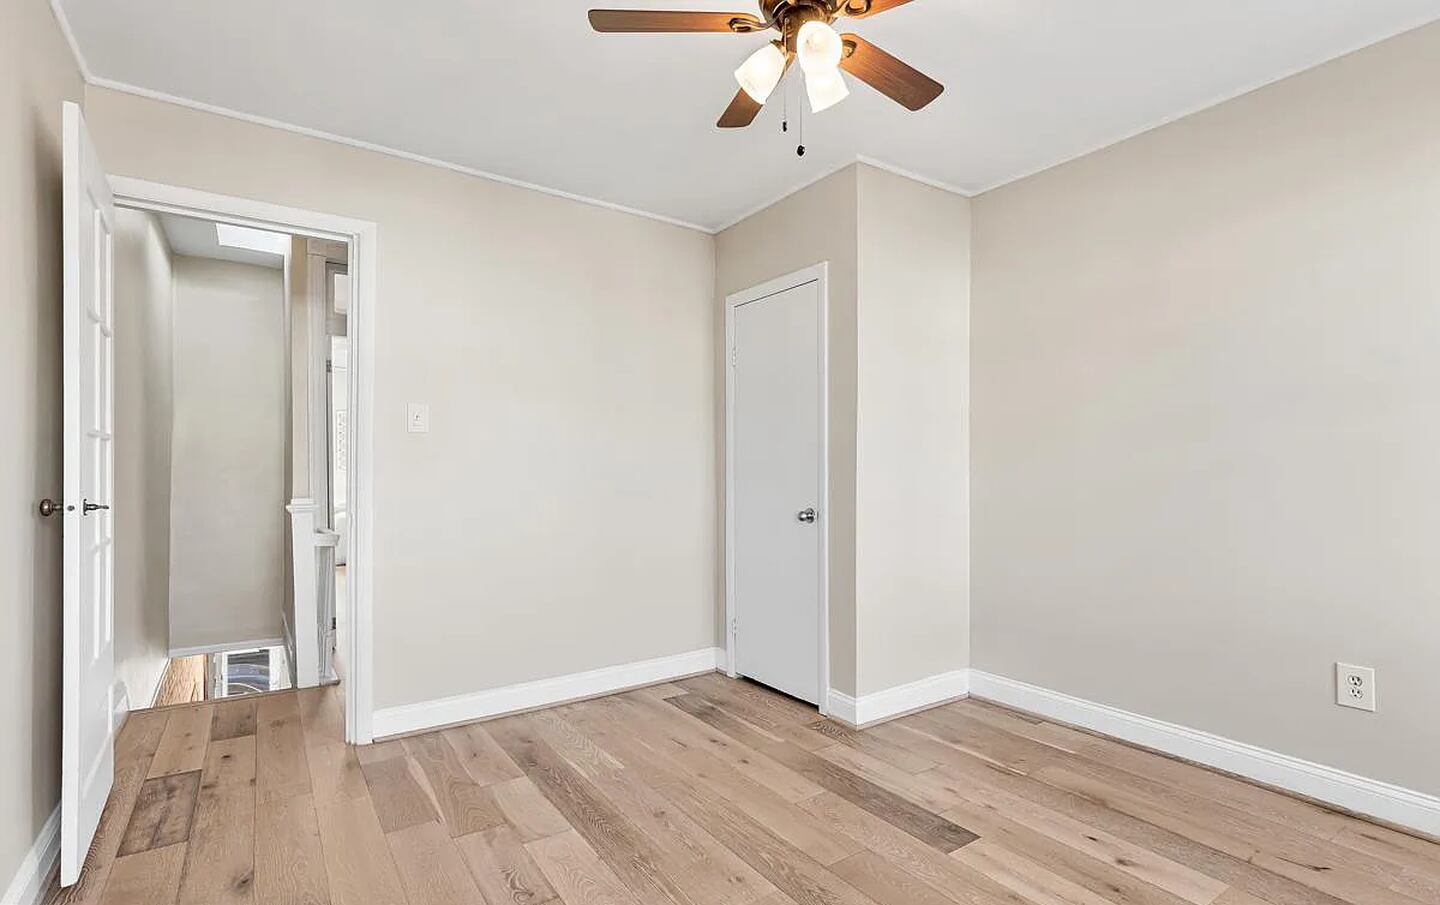 An upstairs bedroom with no furniture. There's hardwood floors with a light stain, beige walls and white trim.